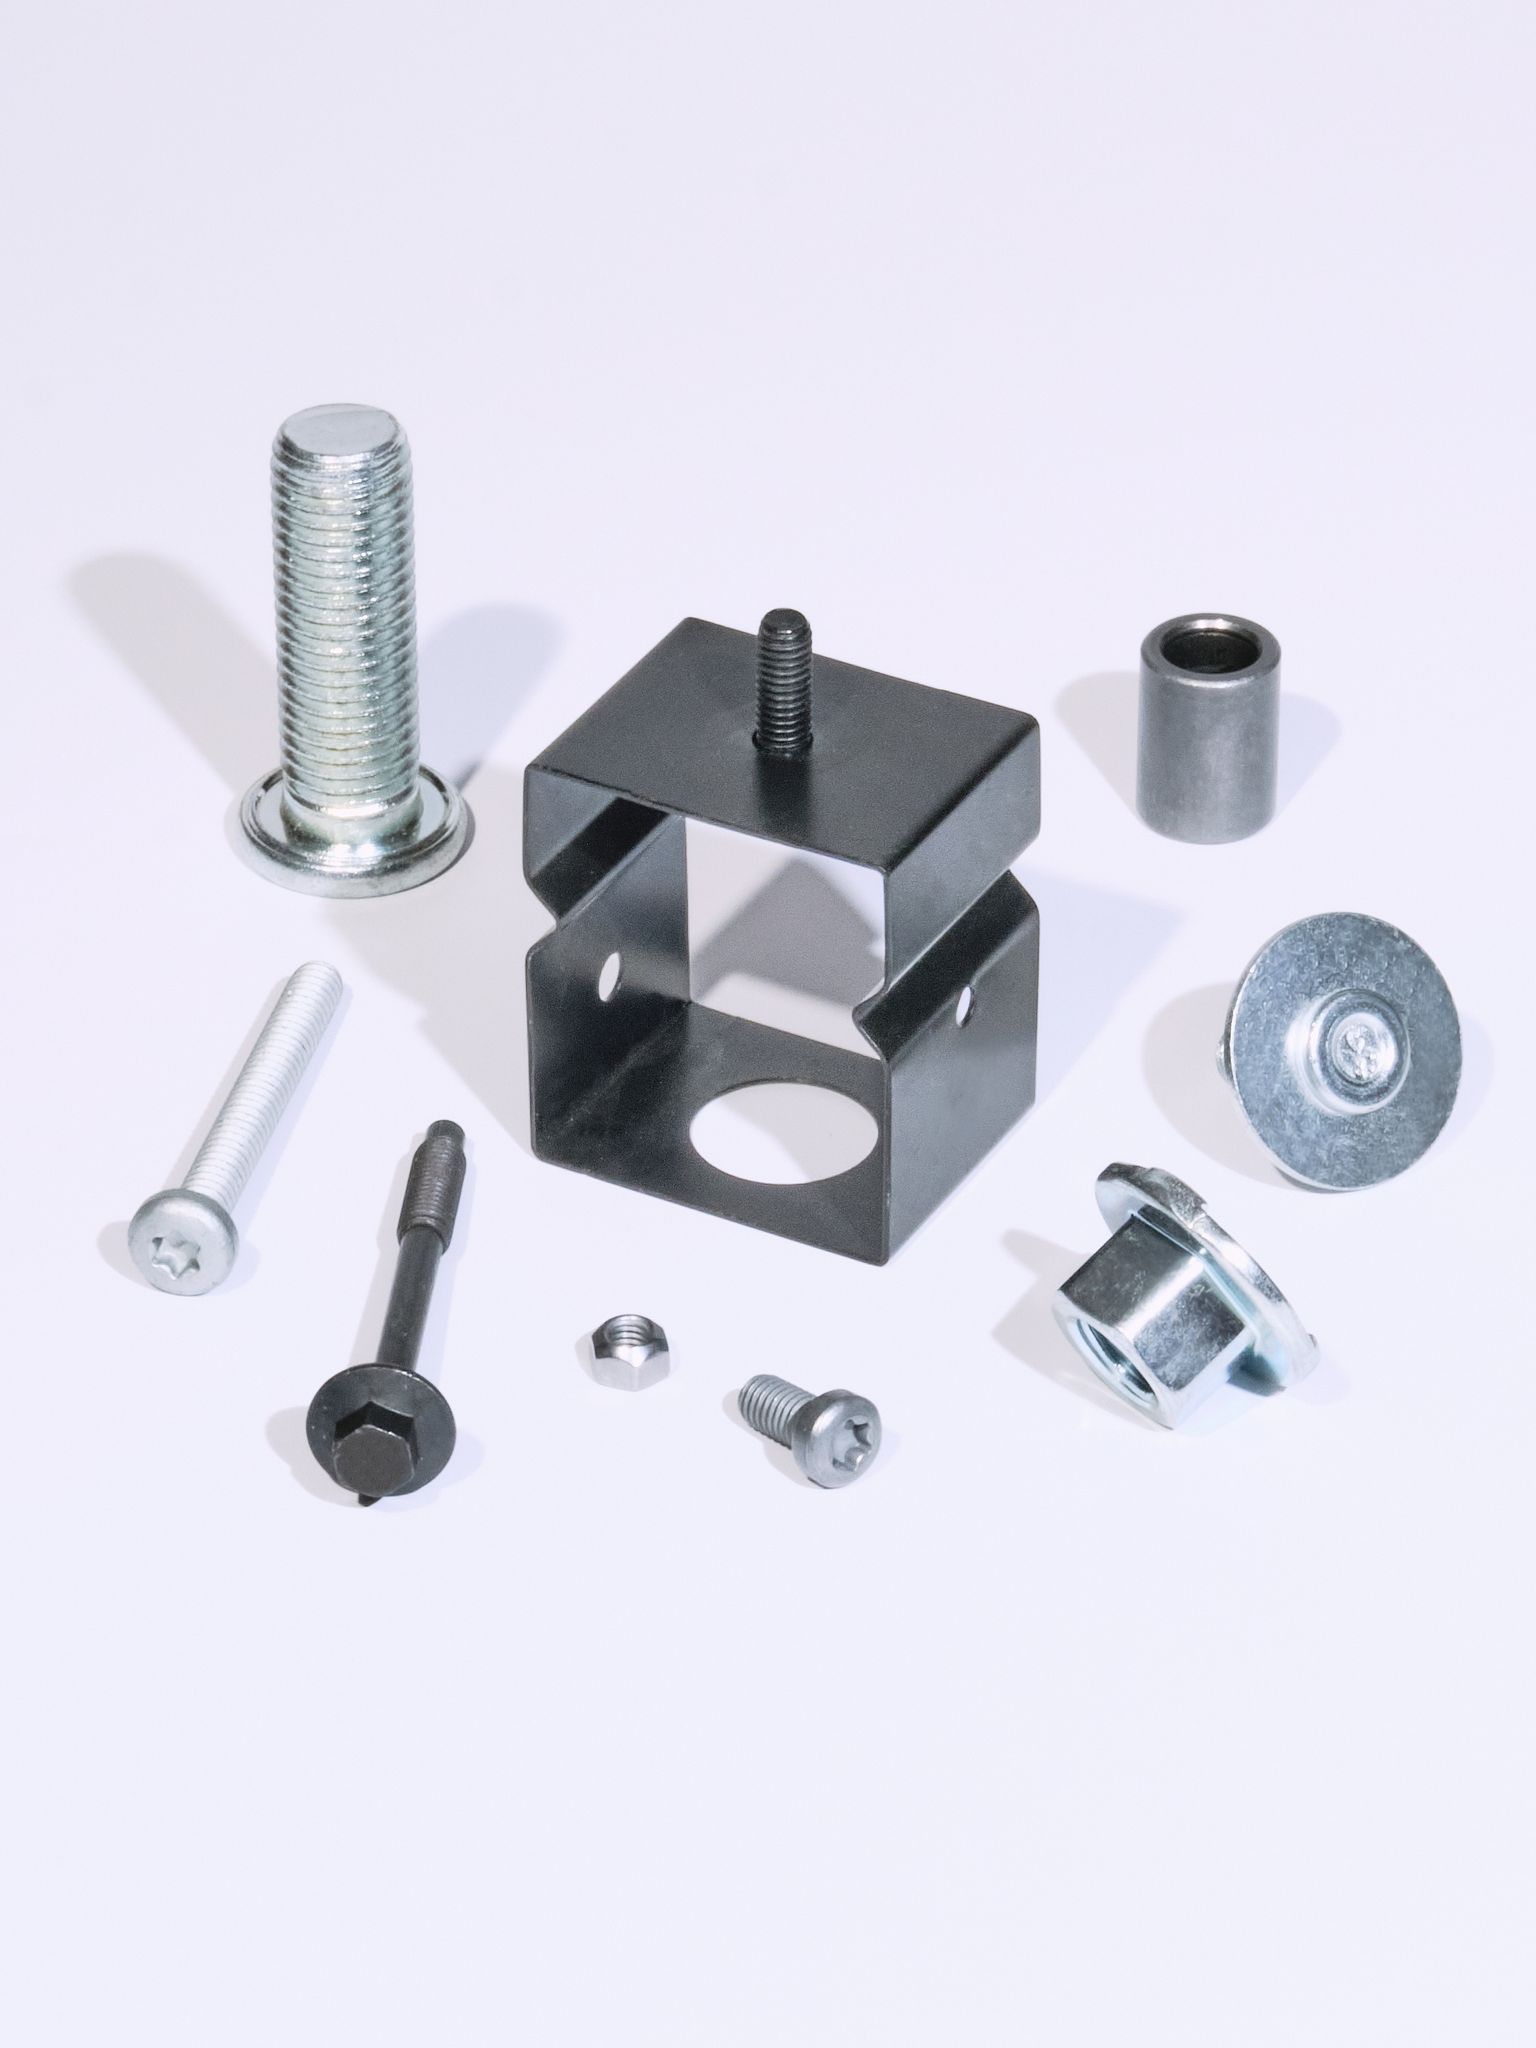 Various screws, nuts and welded parts